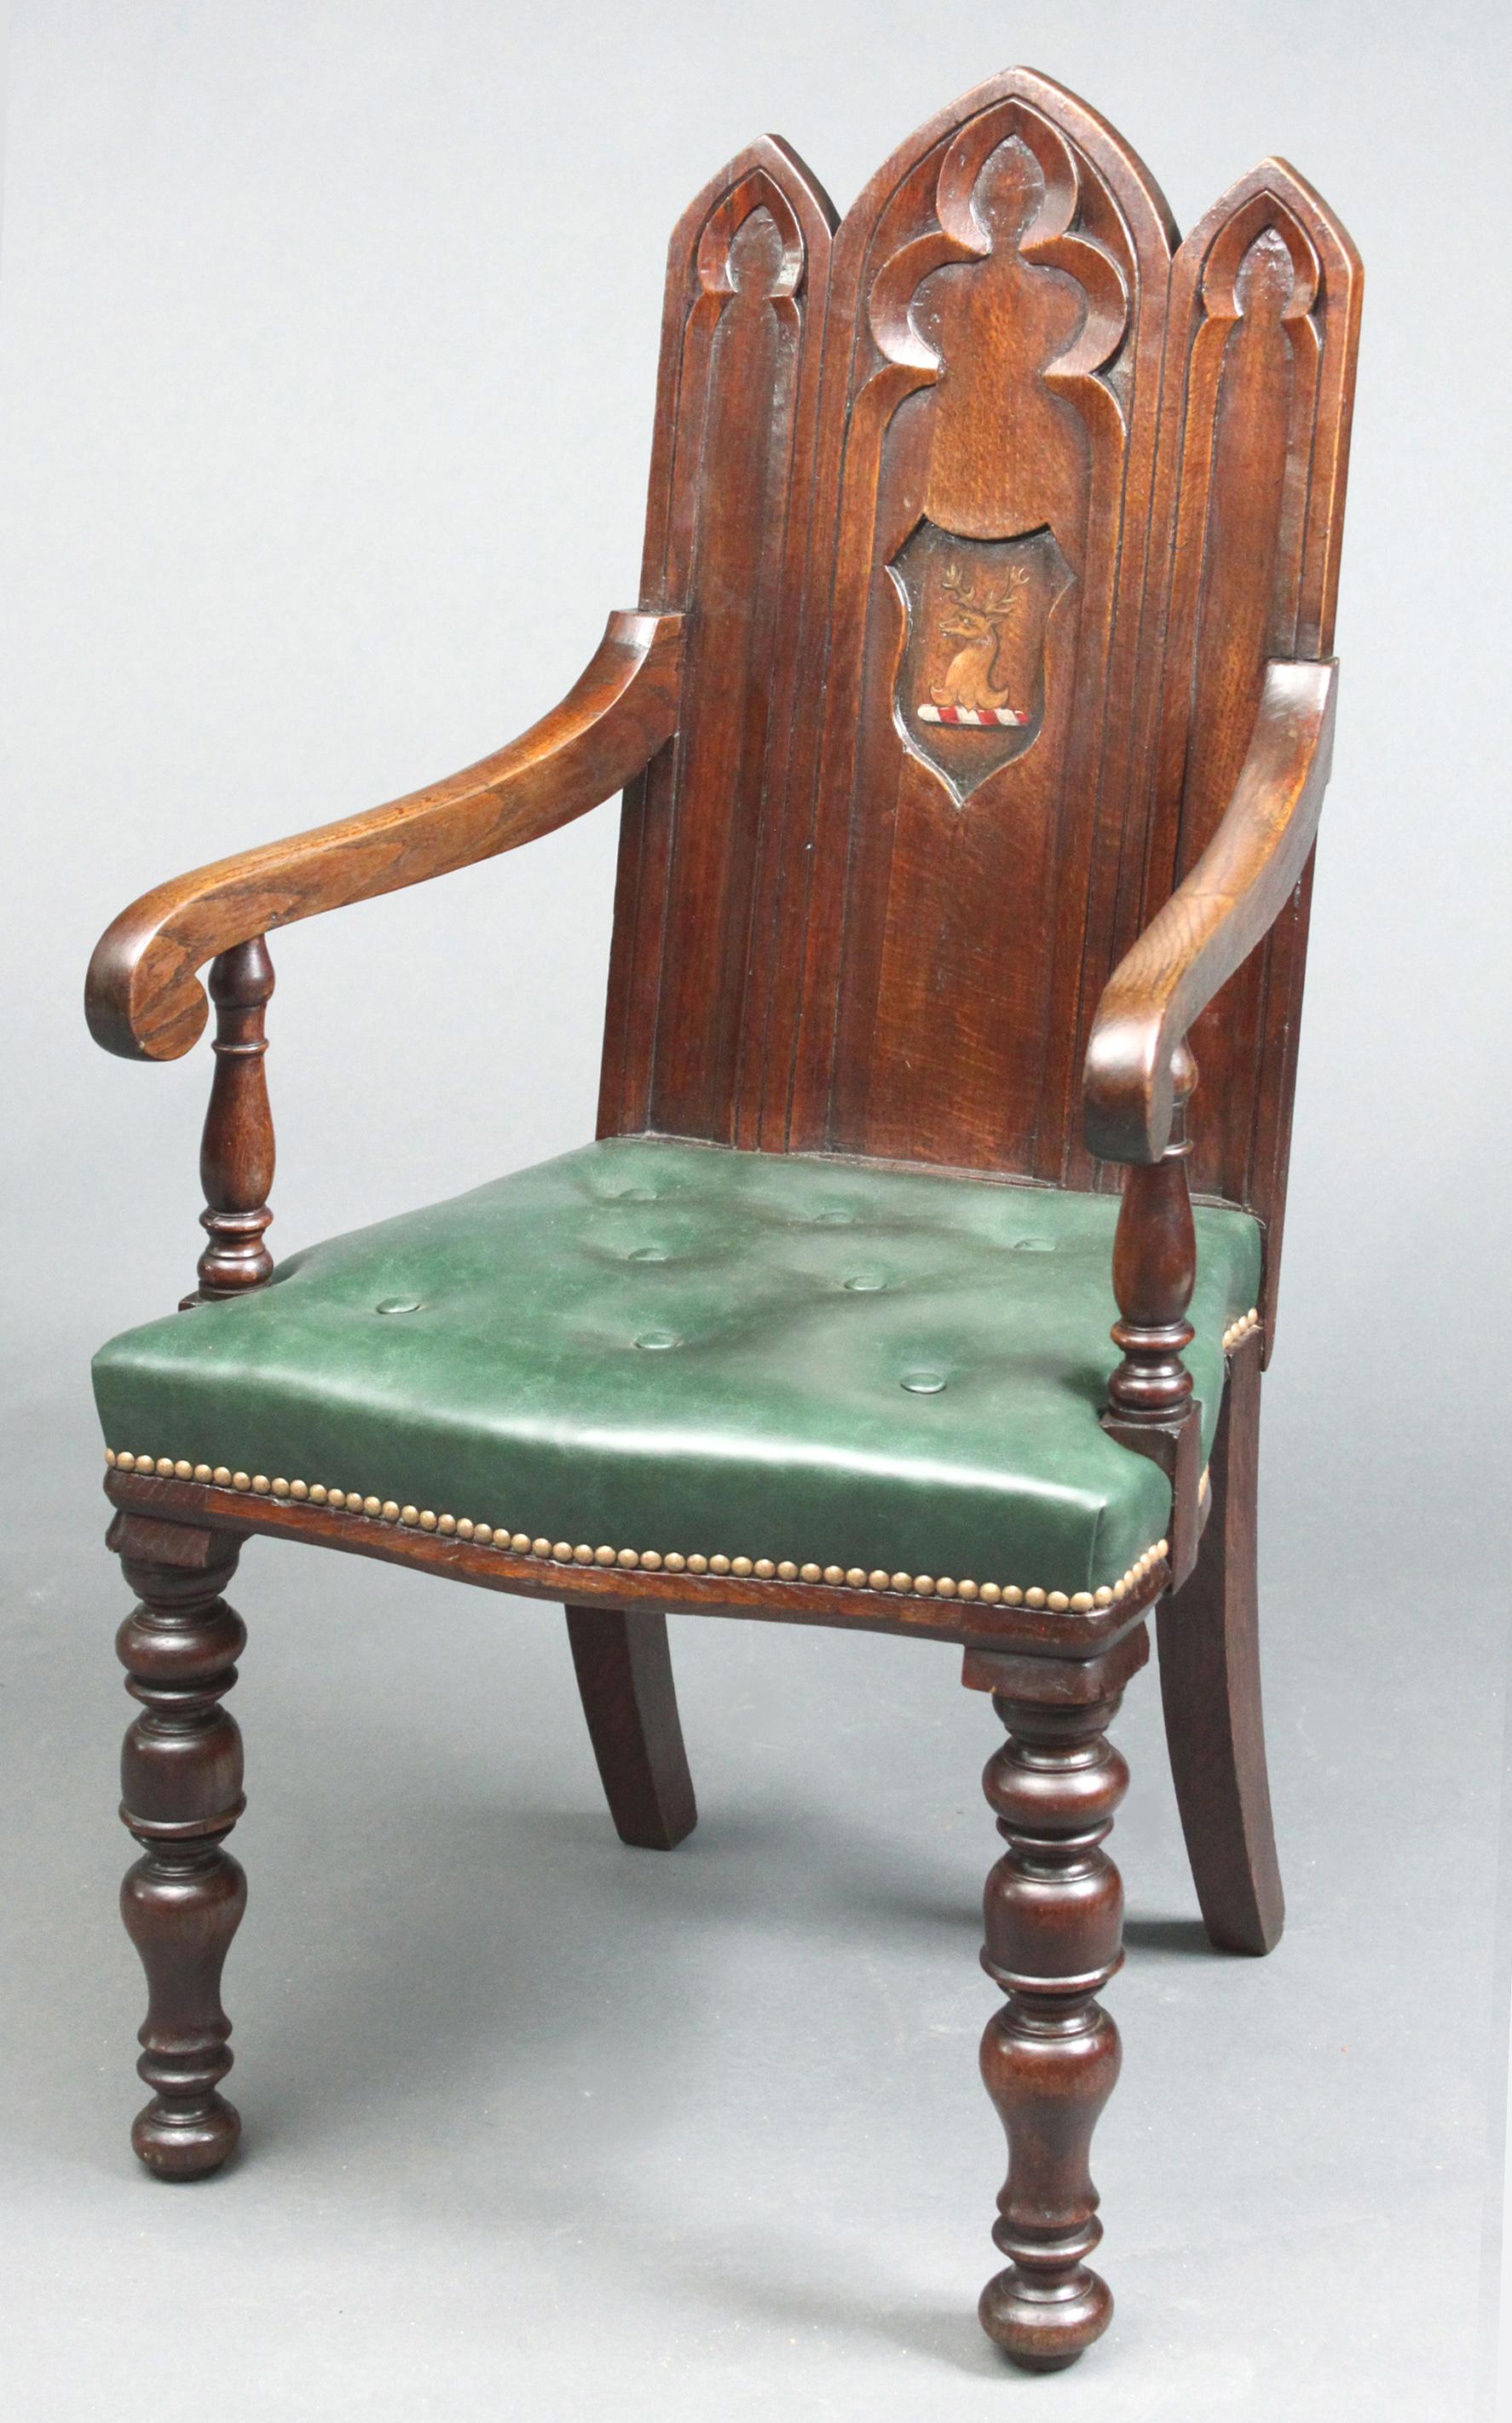 Pair of Armorial Gothic Oak Chairs with Arms In Good Condition For Sale In Bradford-on-Avon, Wiltshire